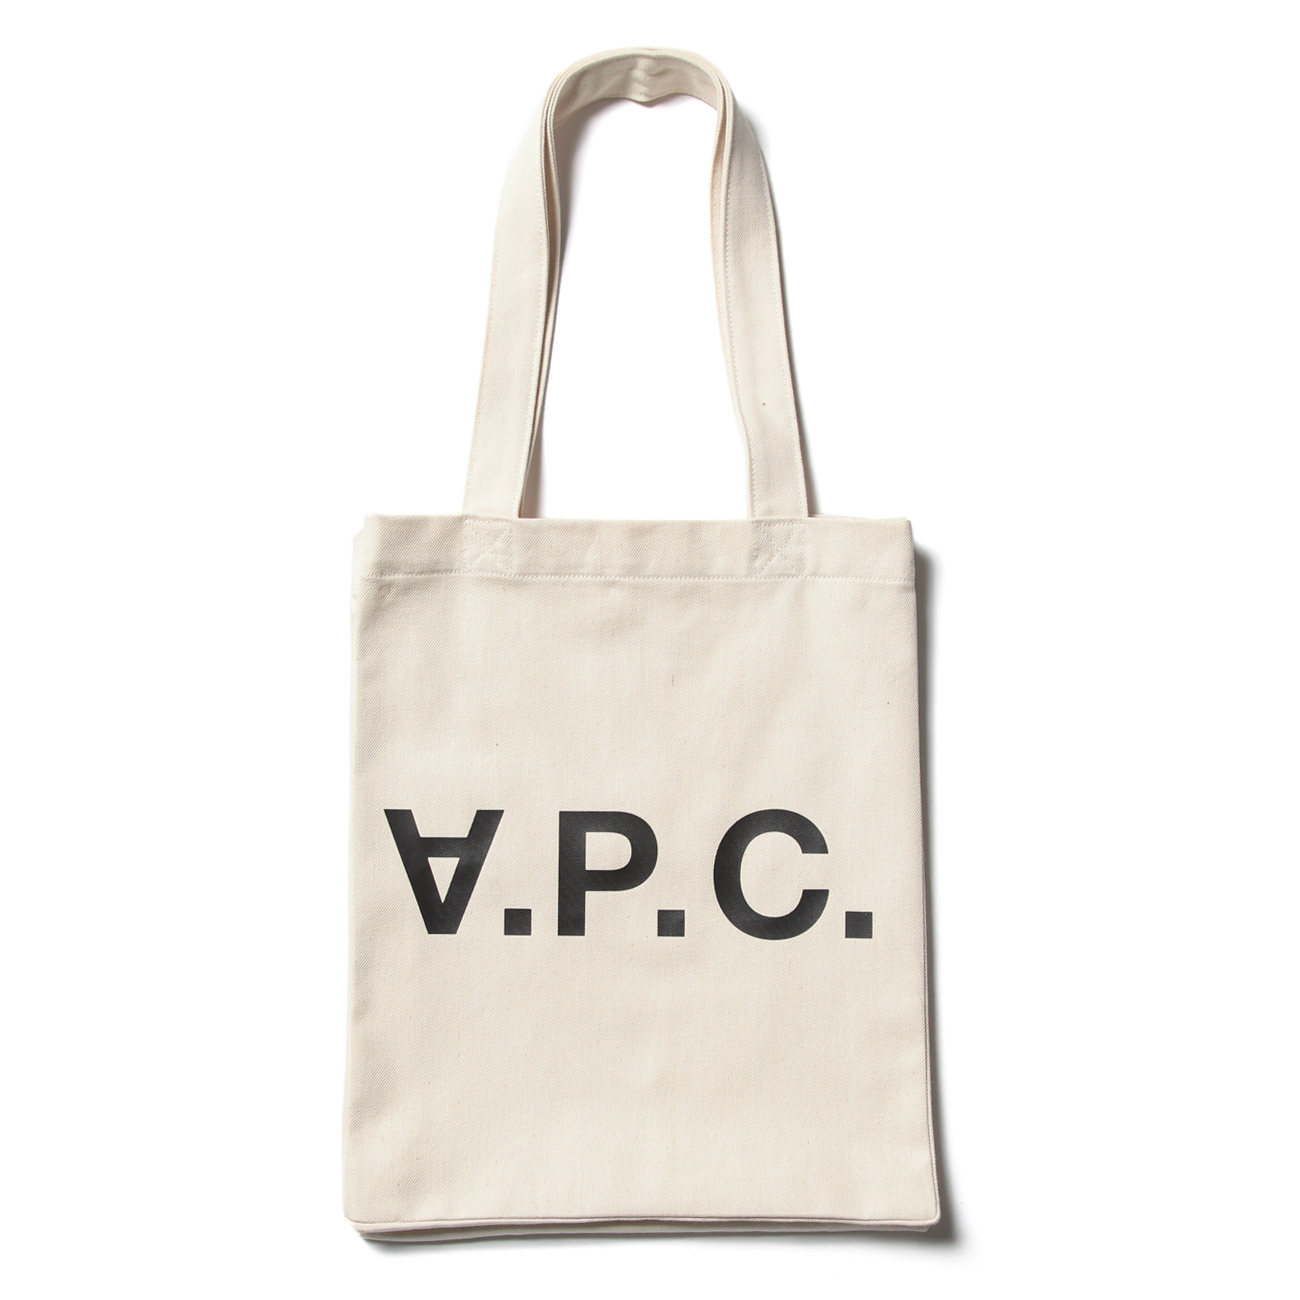 A.P.C.のトートバッグ 新品未使用 - バッグ